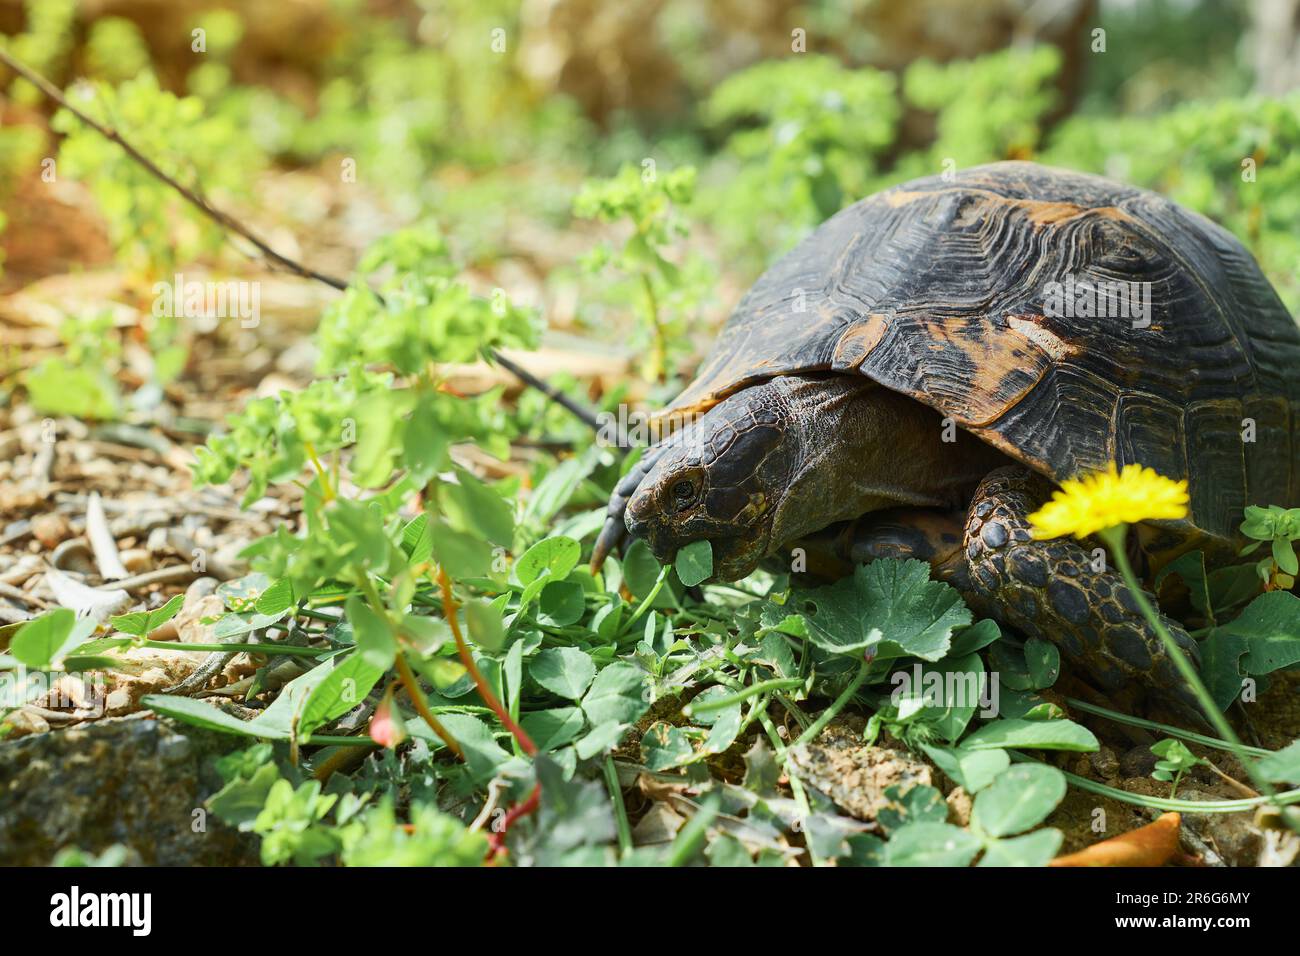 Wild animals in the natural environment, Turtle eats grass on the lawn, next to a flowering dandelion, spring on the Aegean coast Stock Photo